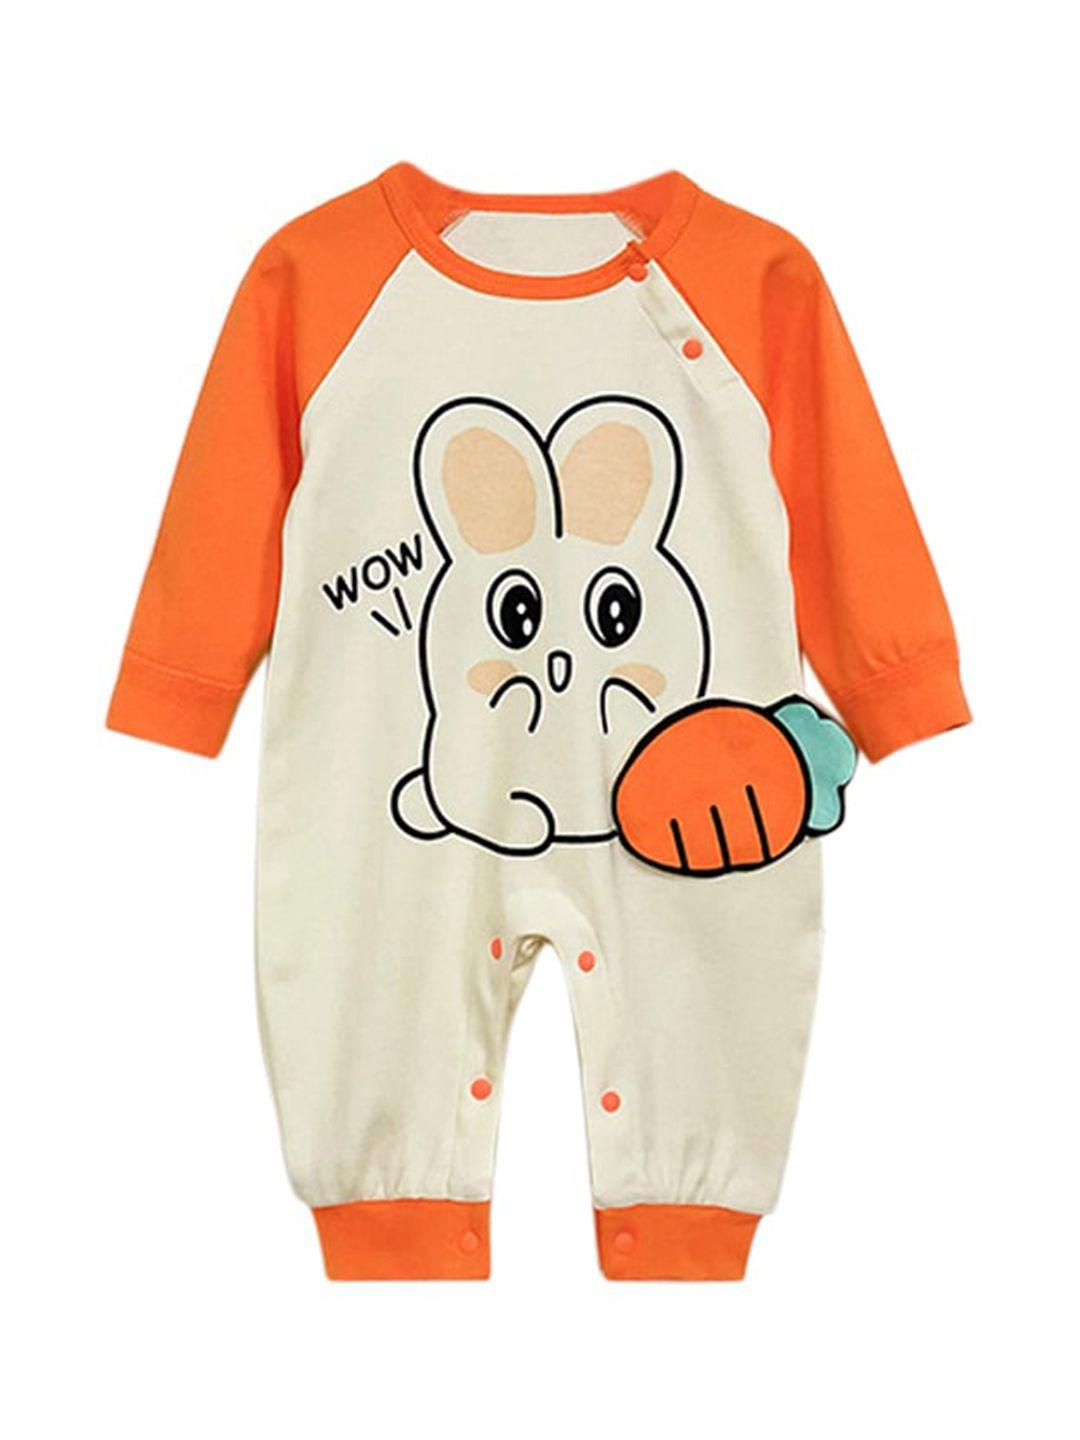 stylecast infant boys off white graphic printed cotton rompers